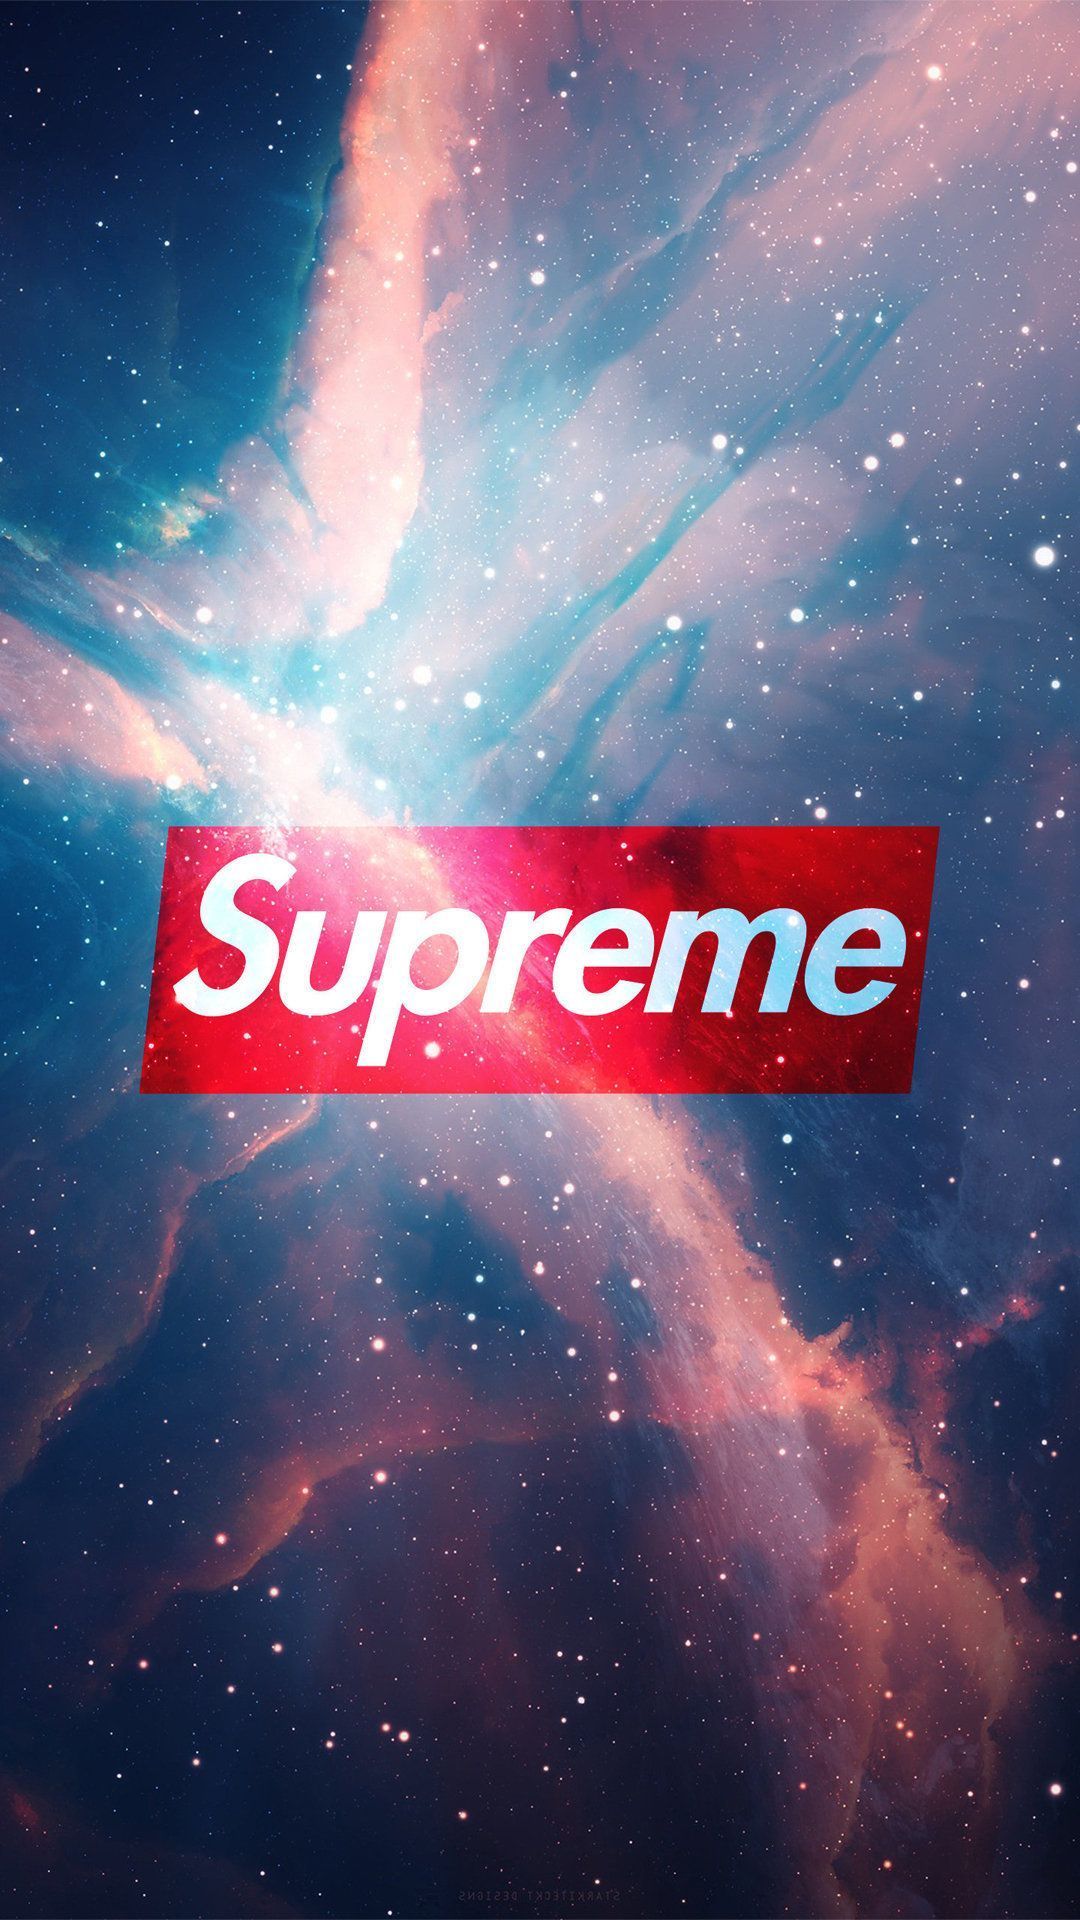 A supreme logo is on top of the galaxy - Supreme